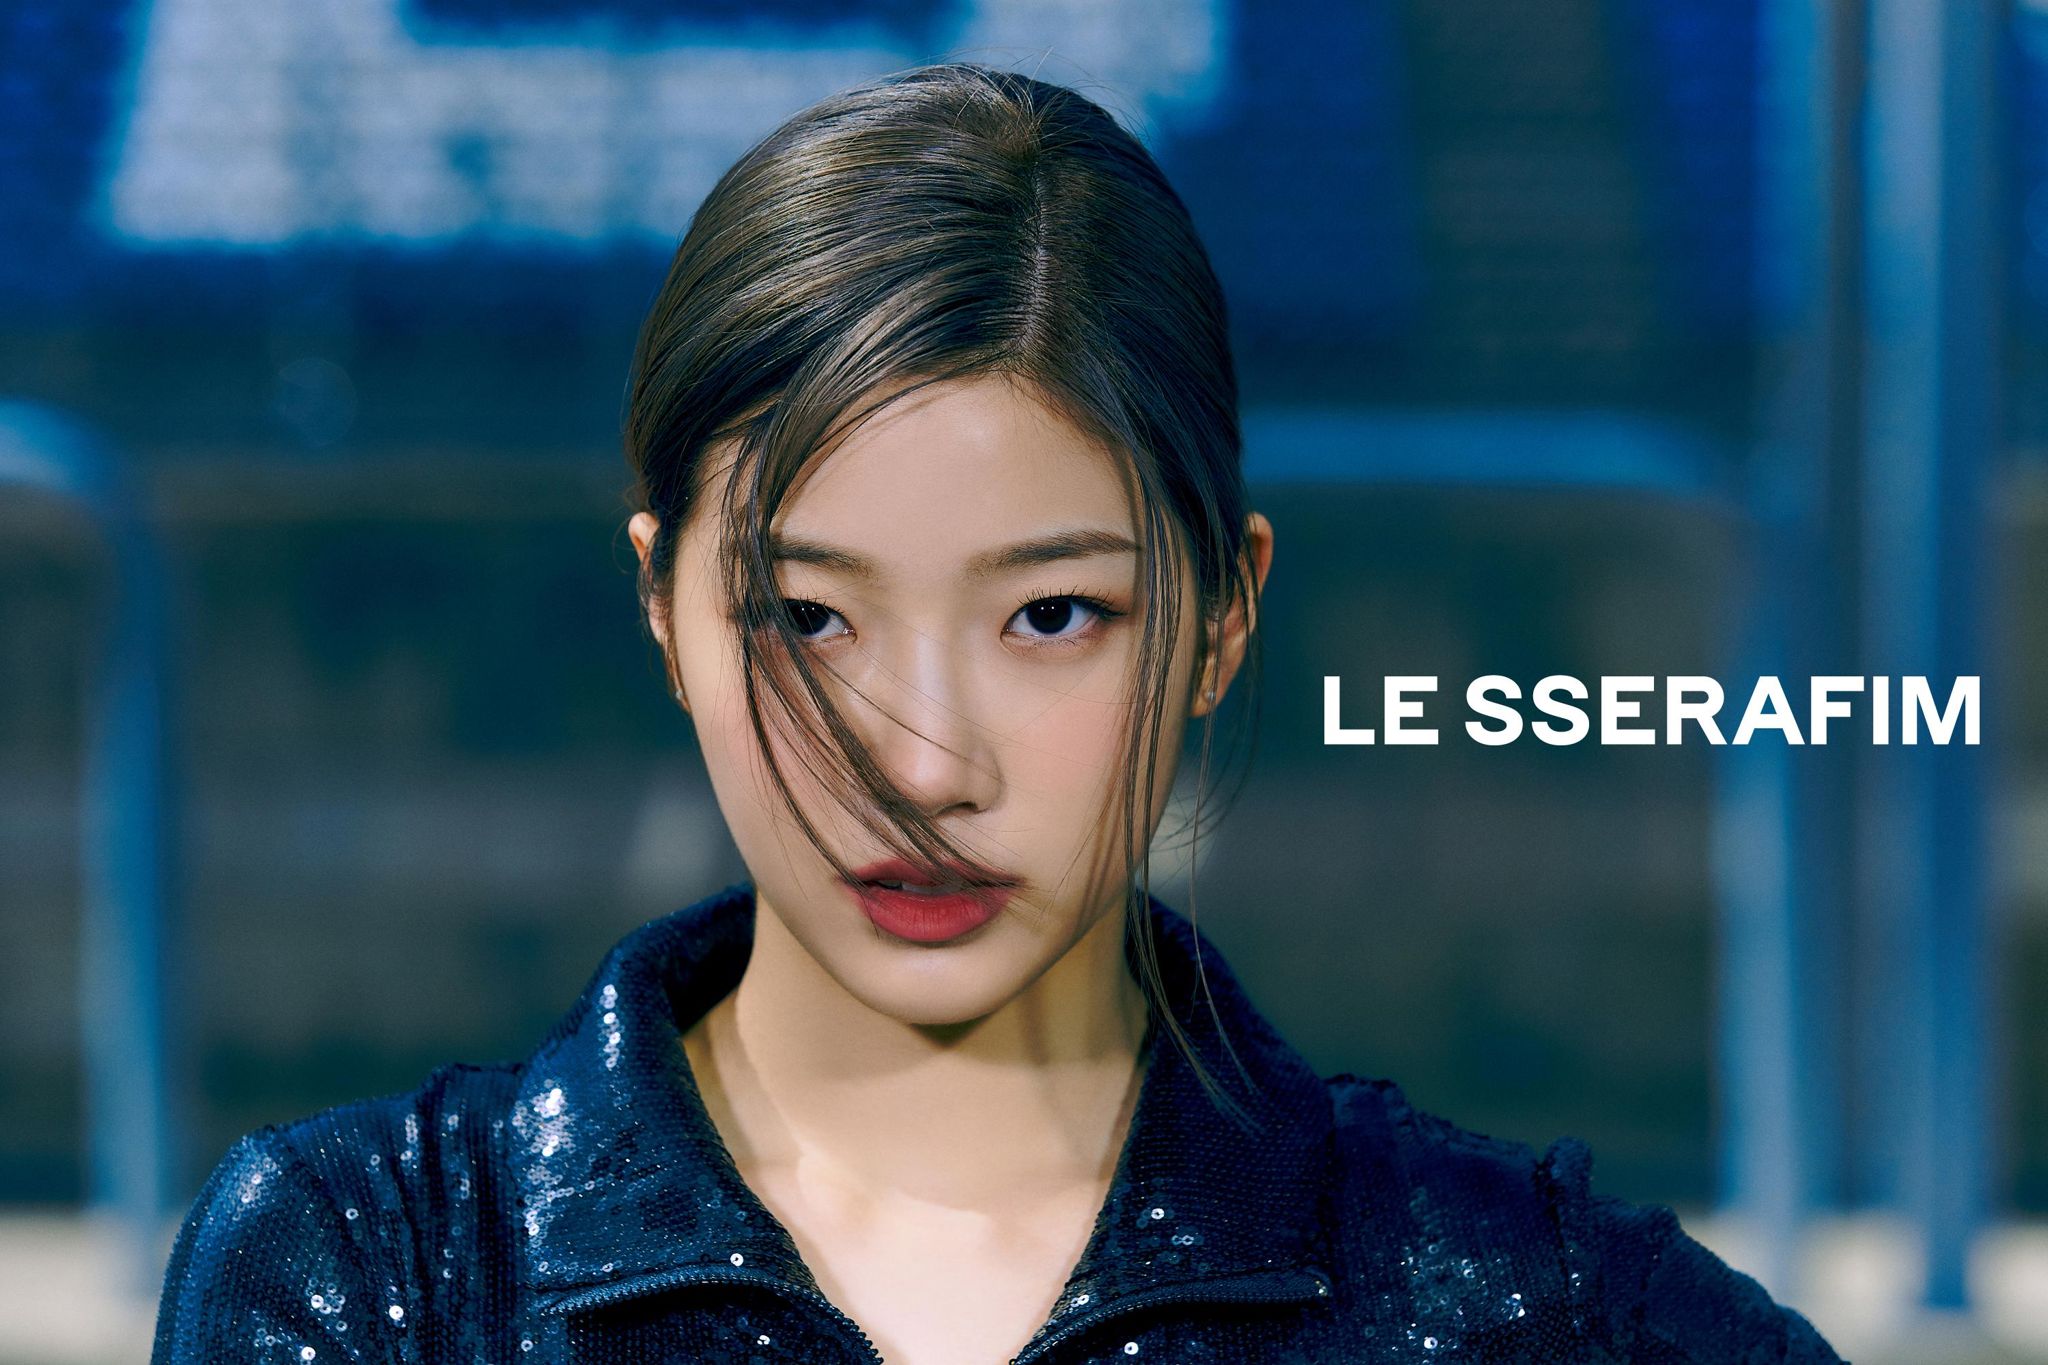 Update: HYBE's New Girl Group LE SSERAFIM Shows Off Their Moves In Dazzling New MV Teaser For “FEARLESS”